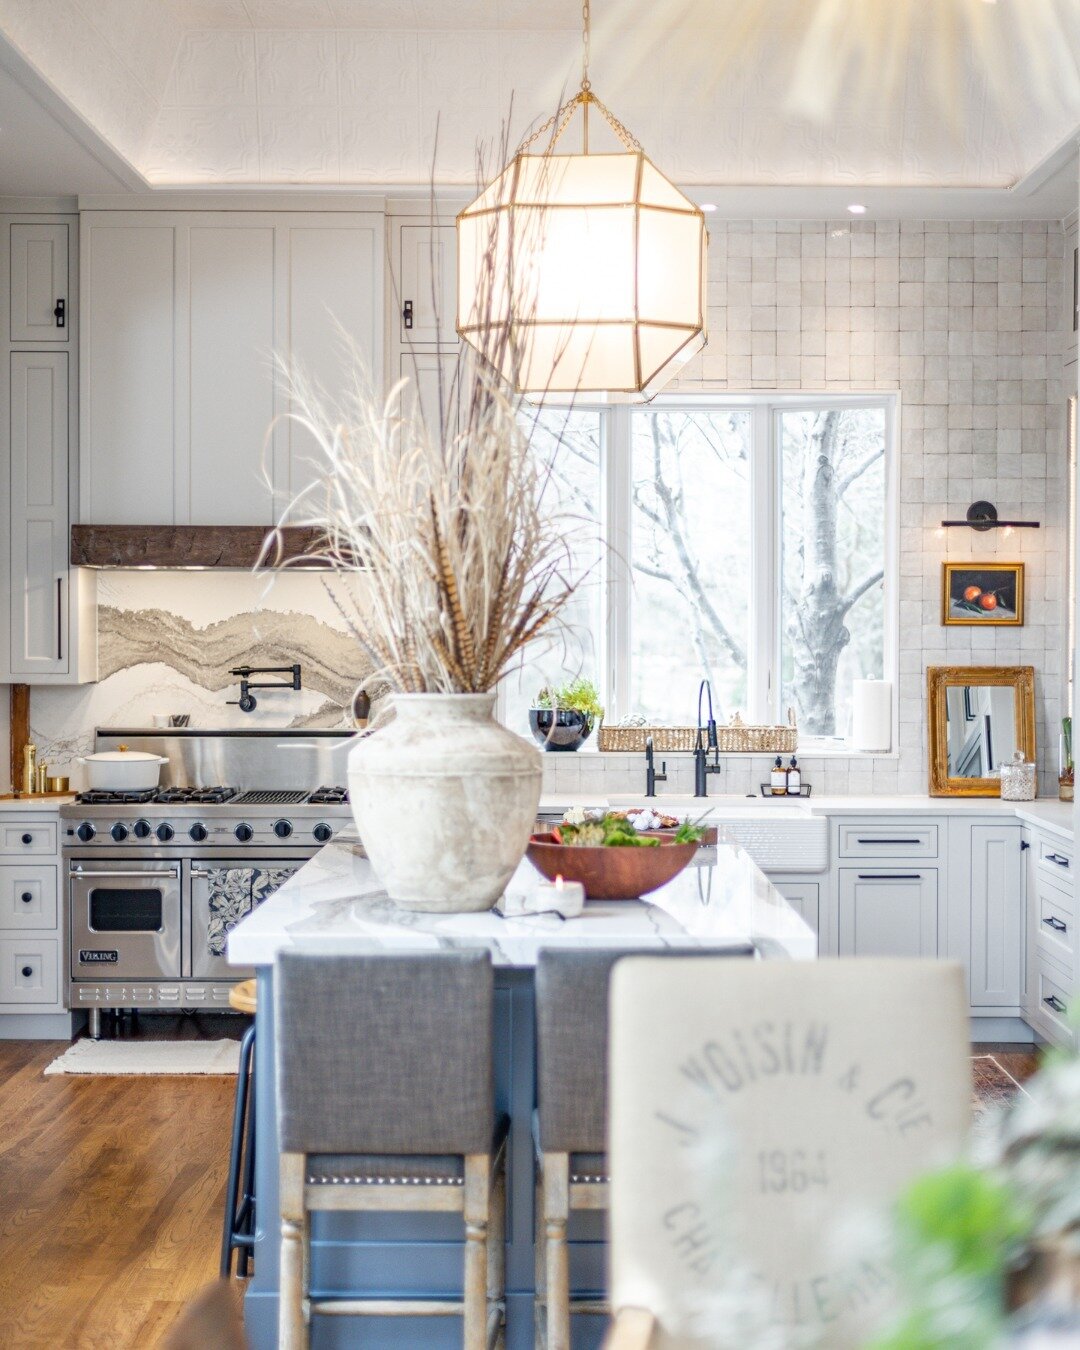 We always tell our clients that a kitchen should be designed based on how you live your life! Whether they are master home chefs or take-out regulars, we listen to each client's unique needs and their everyday home life.

After all, that's what a bes